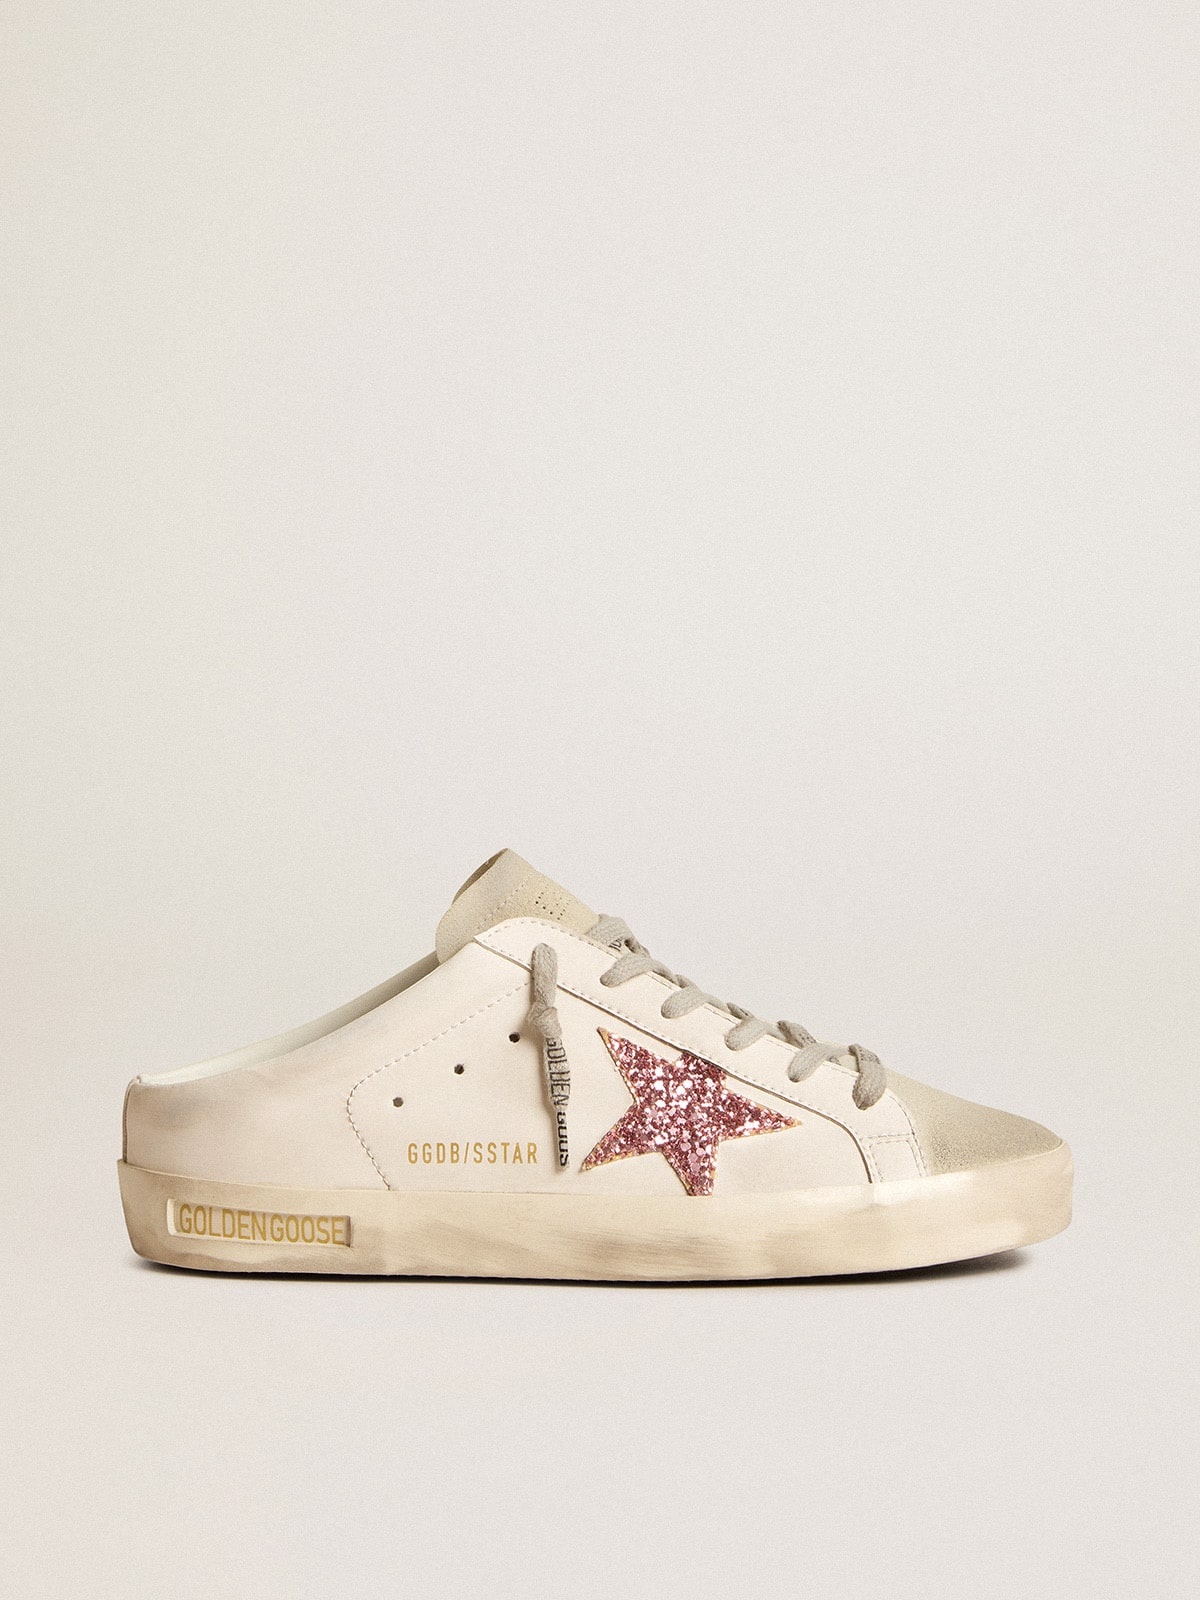 Bio-based Super-Star Sabot with pink glitter star and suede toe - 1